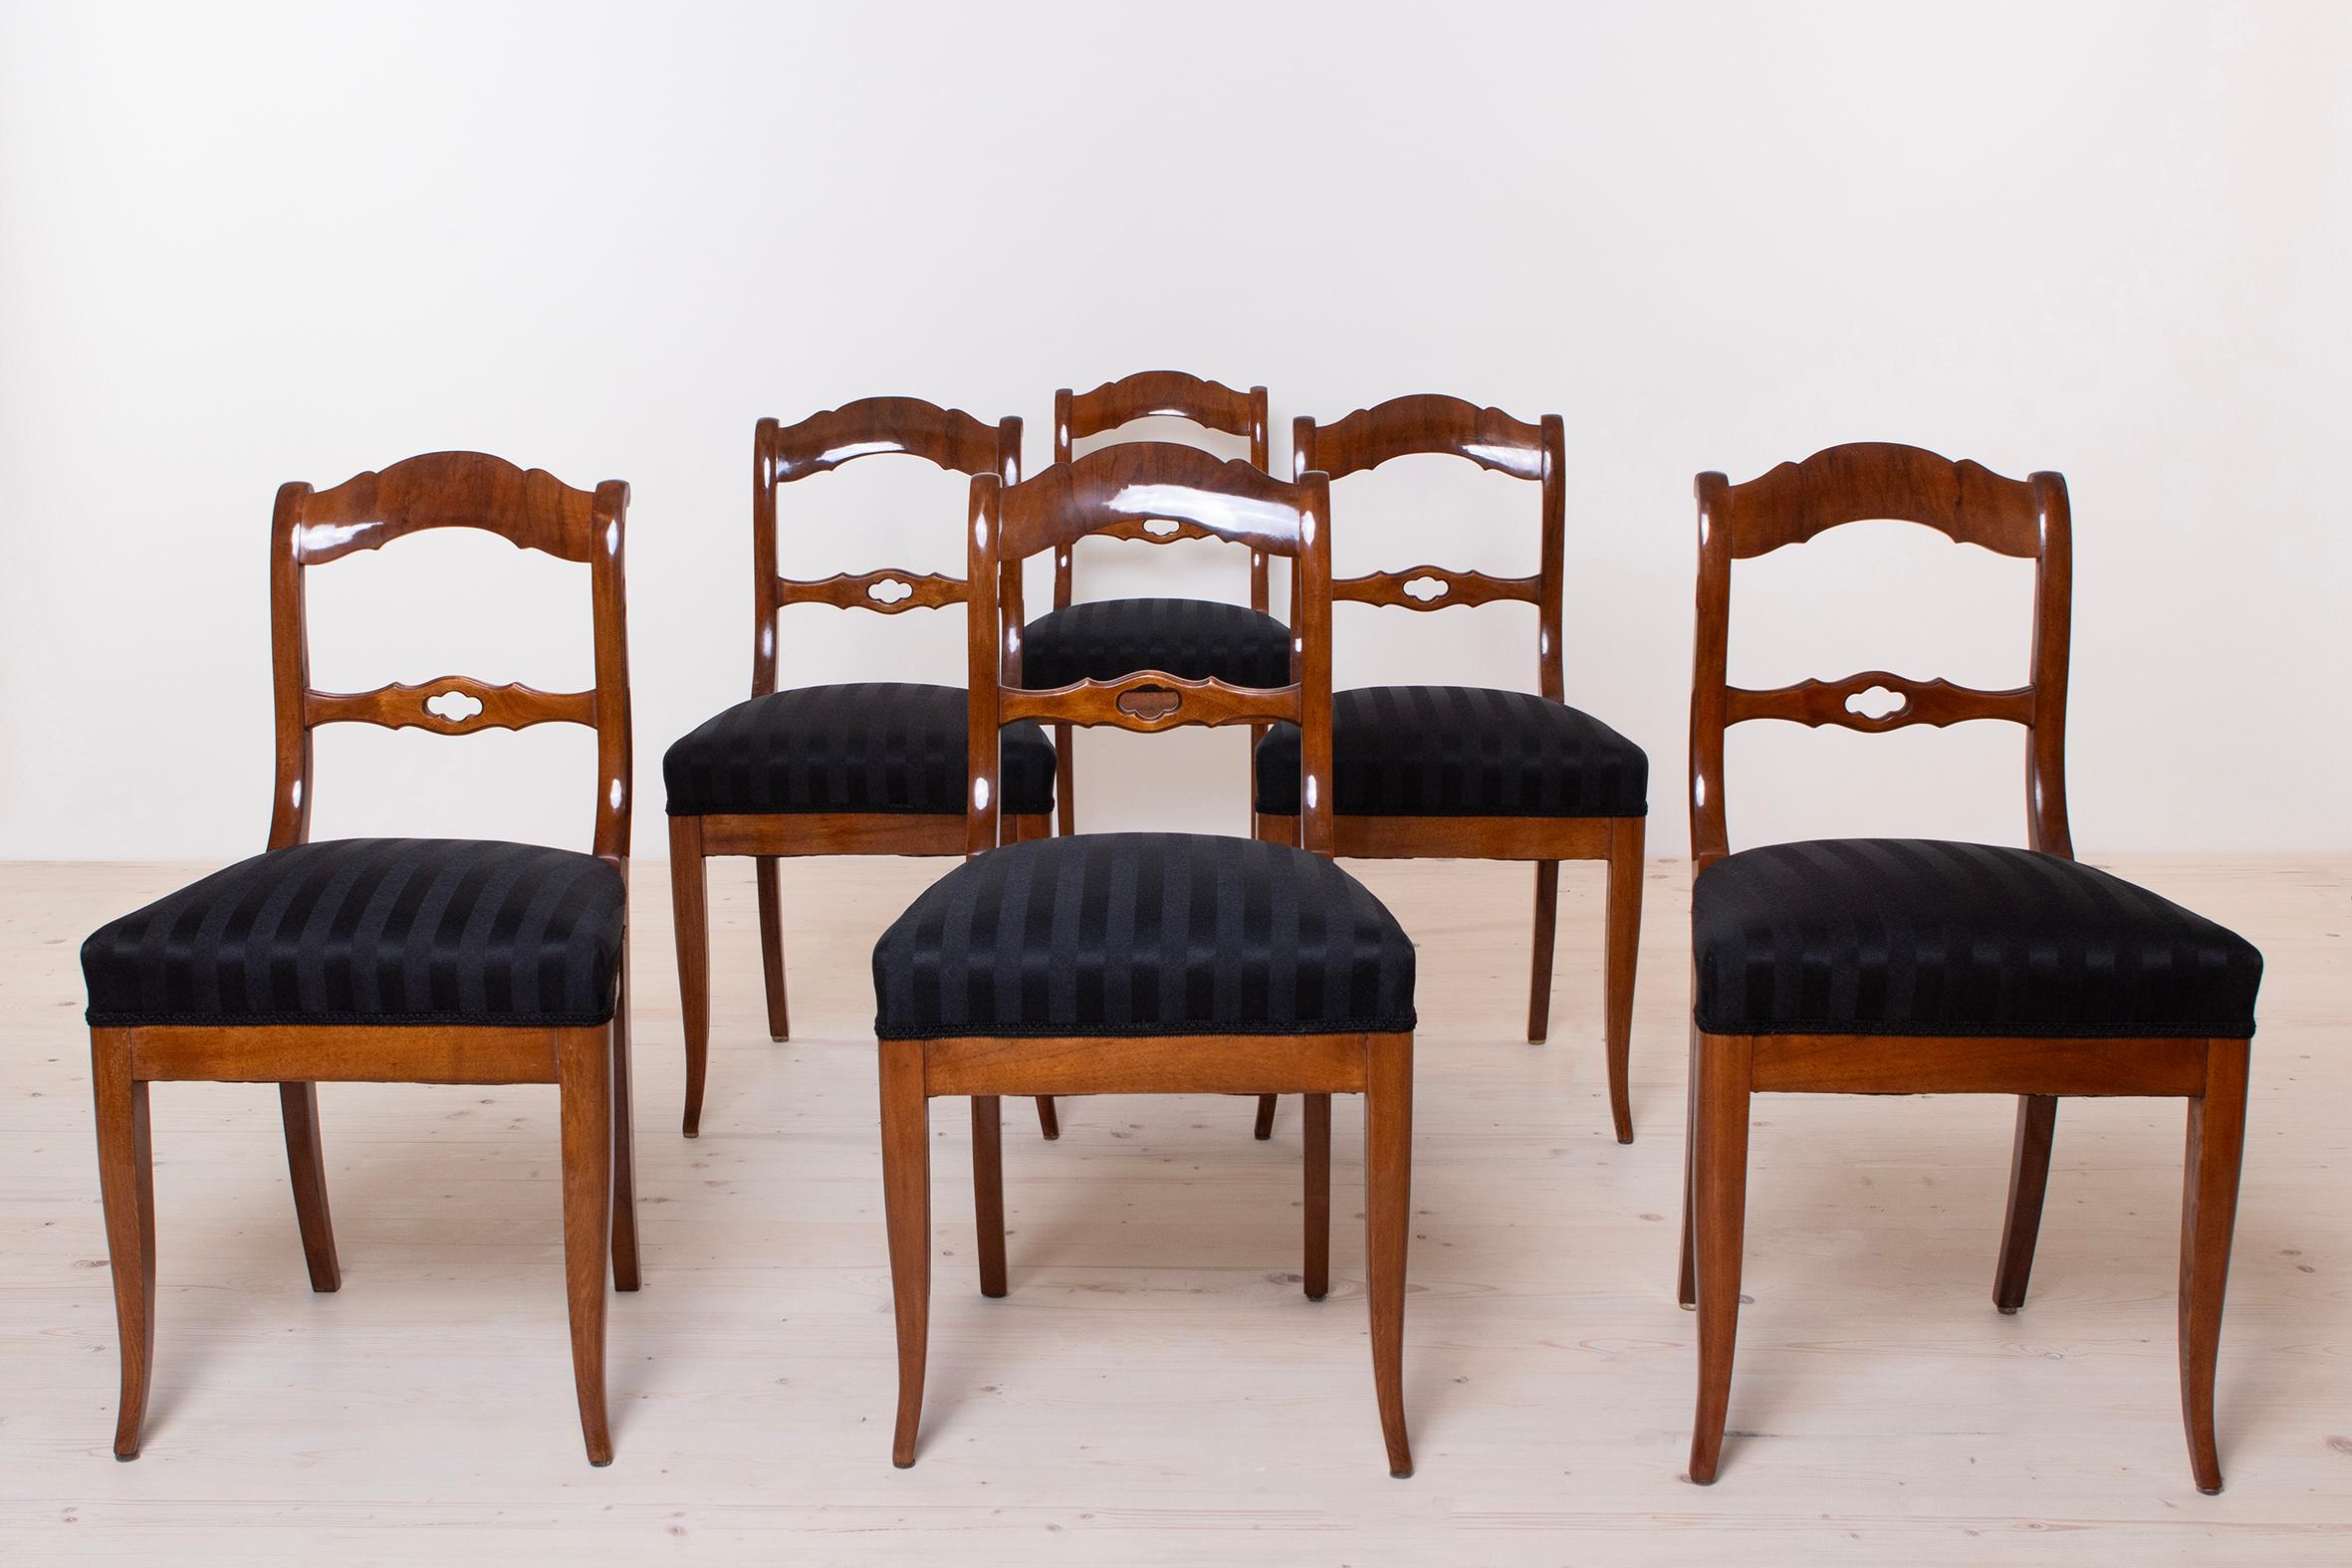 Set of six comfortable, original Biedermeier style chairs manufactured in Germany, circa 1820-1840. The chairs are made of walnut, partially on the seat and backrest veneered with walnut veneer. The set is completely restored. The upholstery has